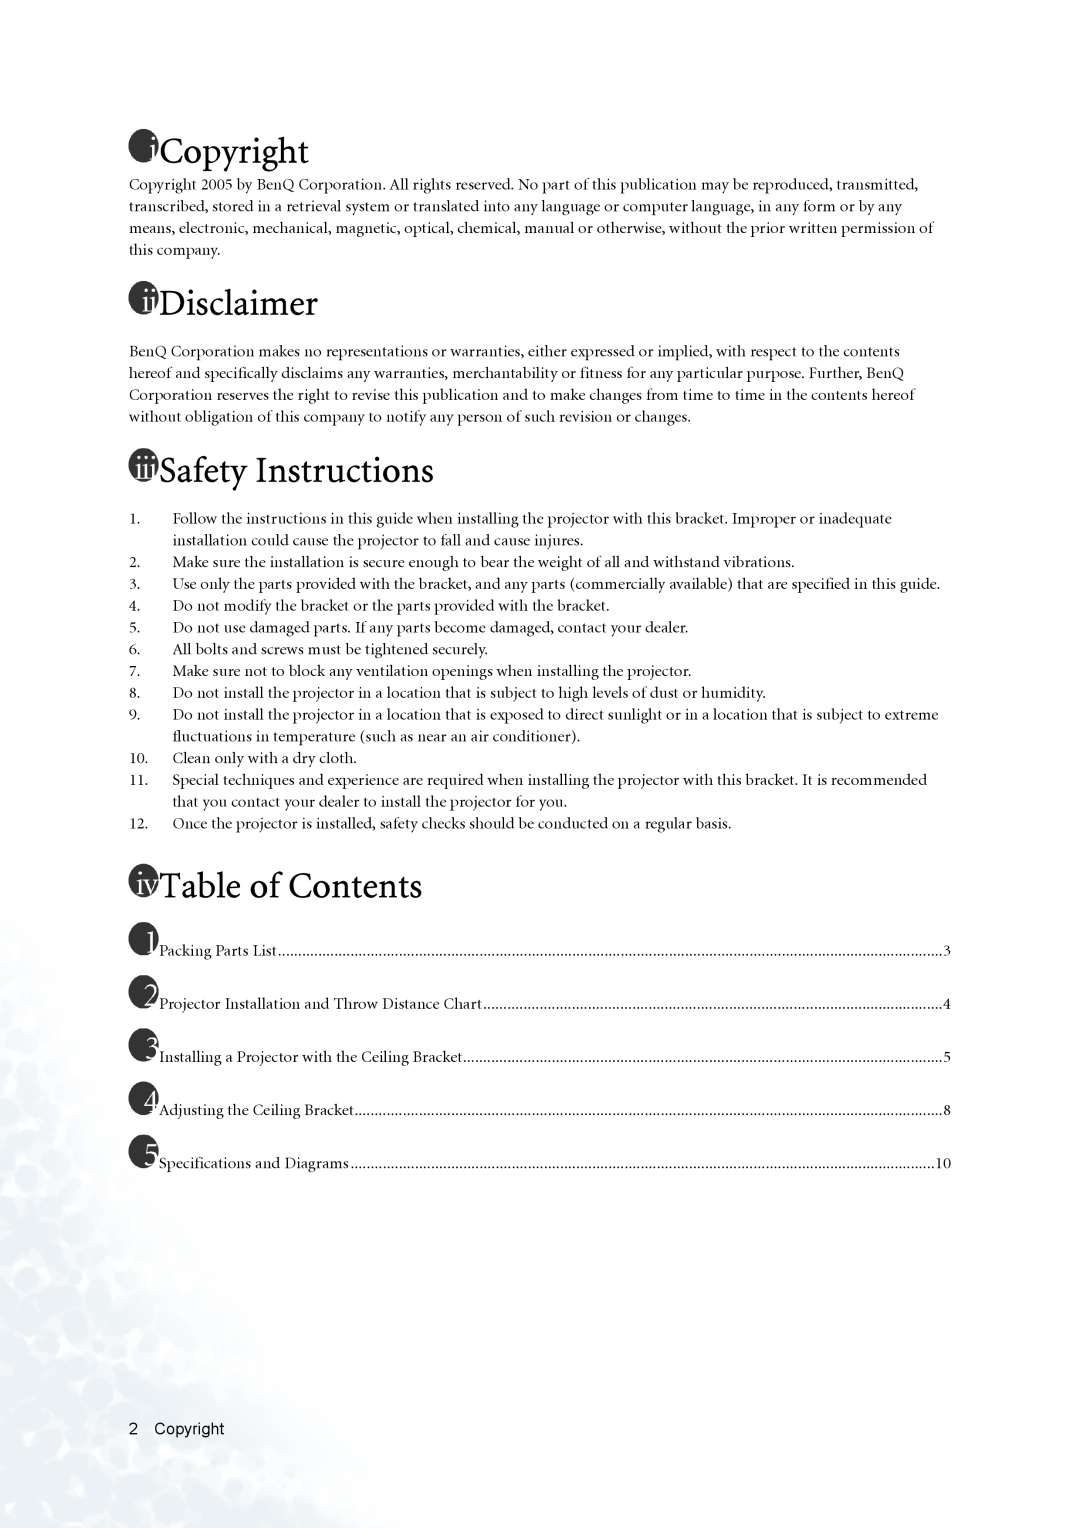 BenQ PE8720 manual Copyright, Disclaimer, Safety Instructions, Table of Contents 